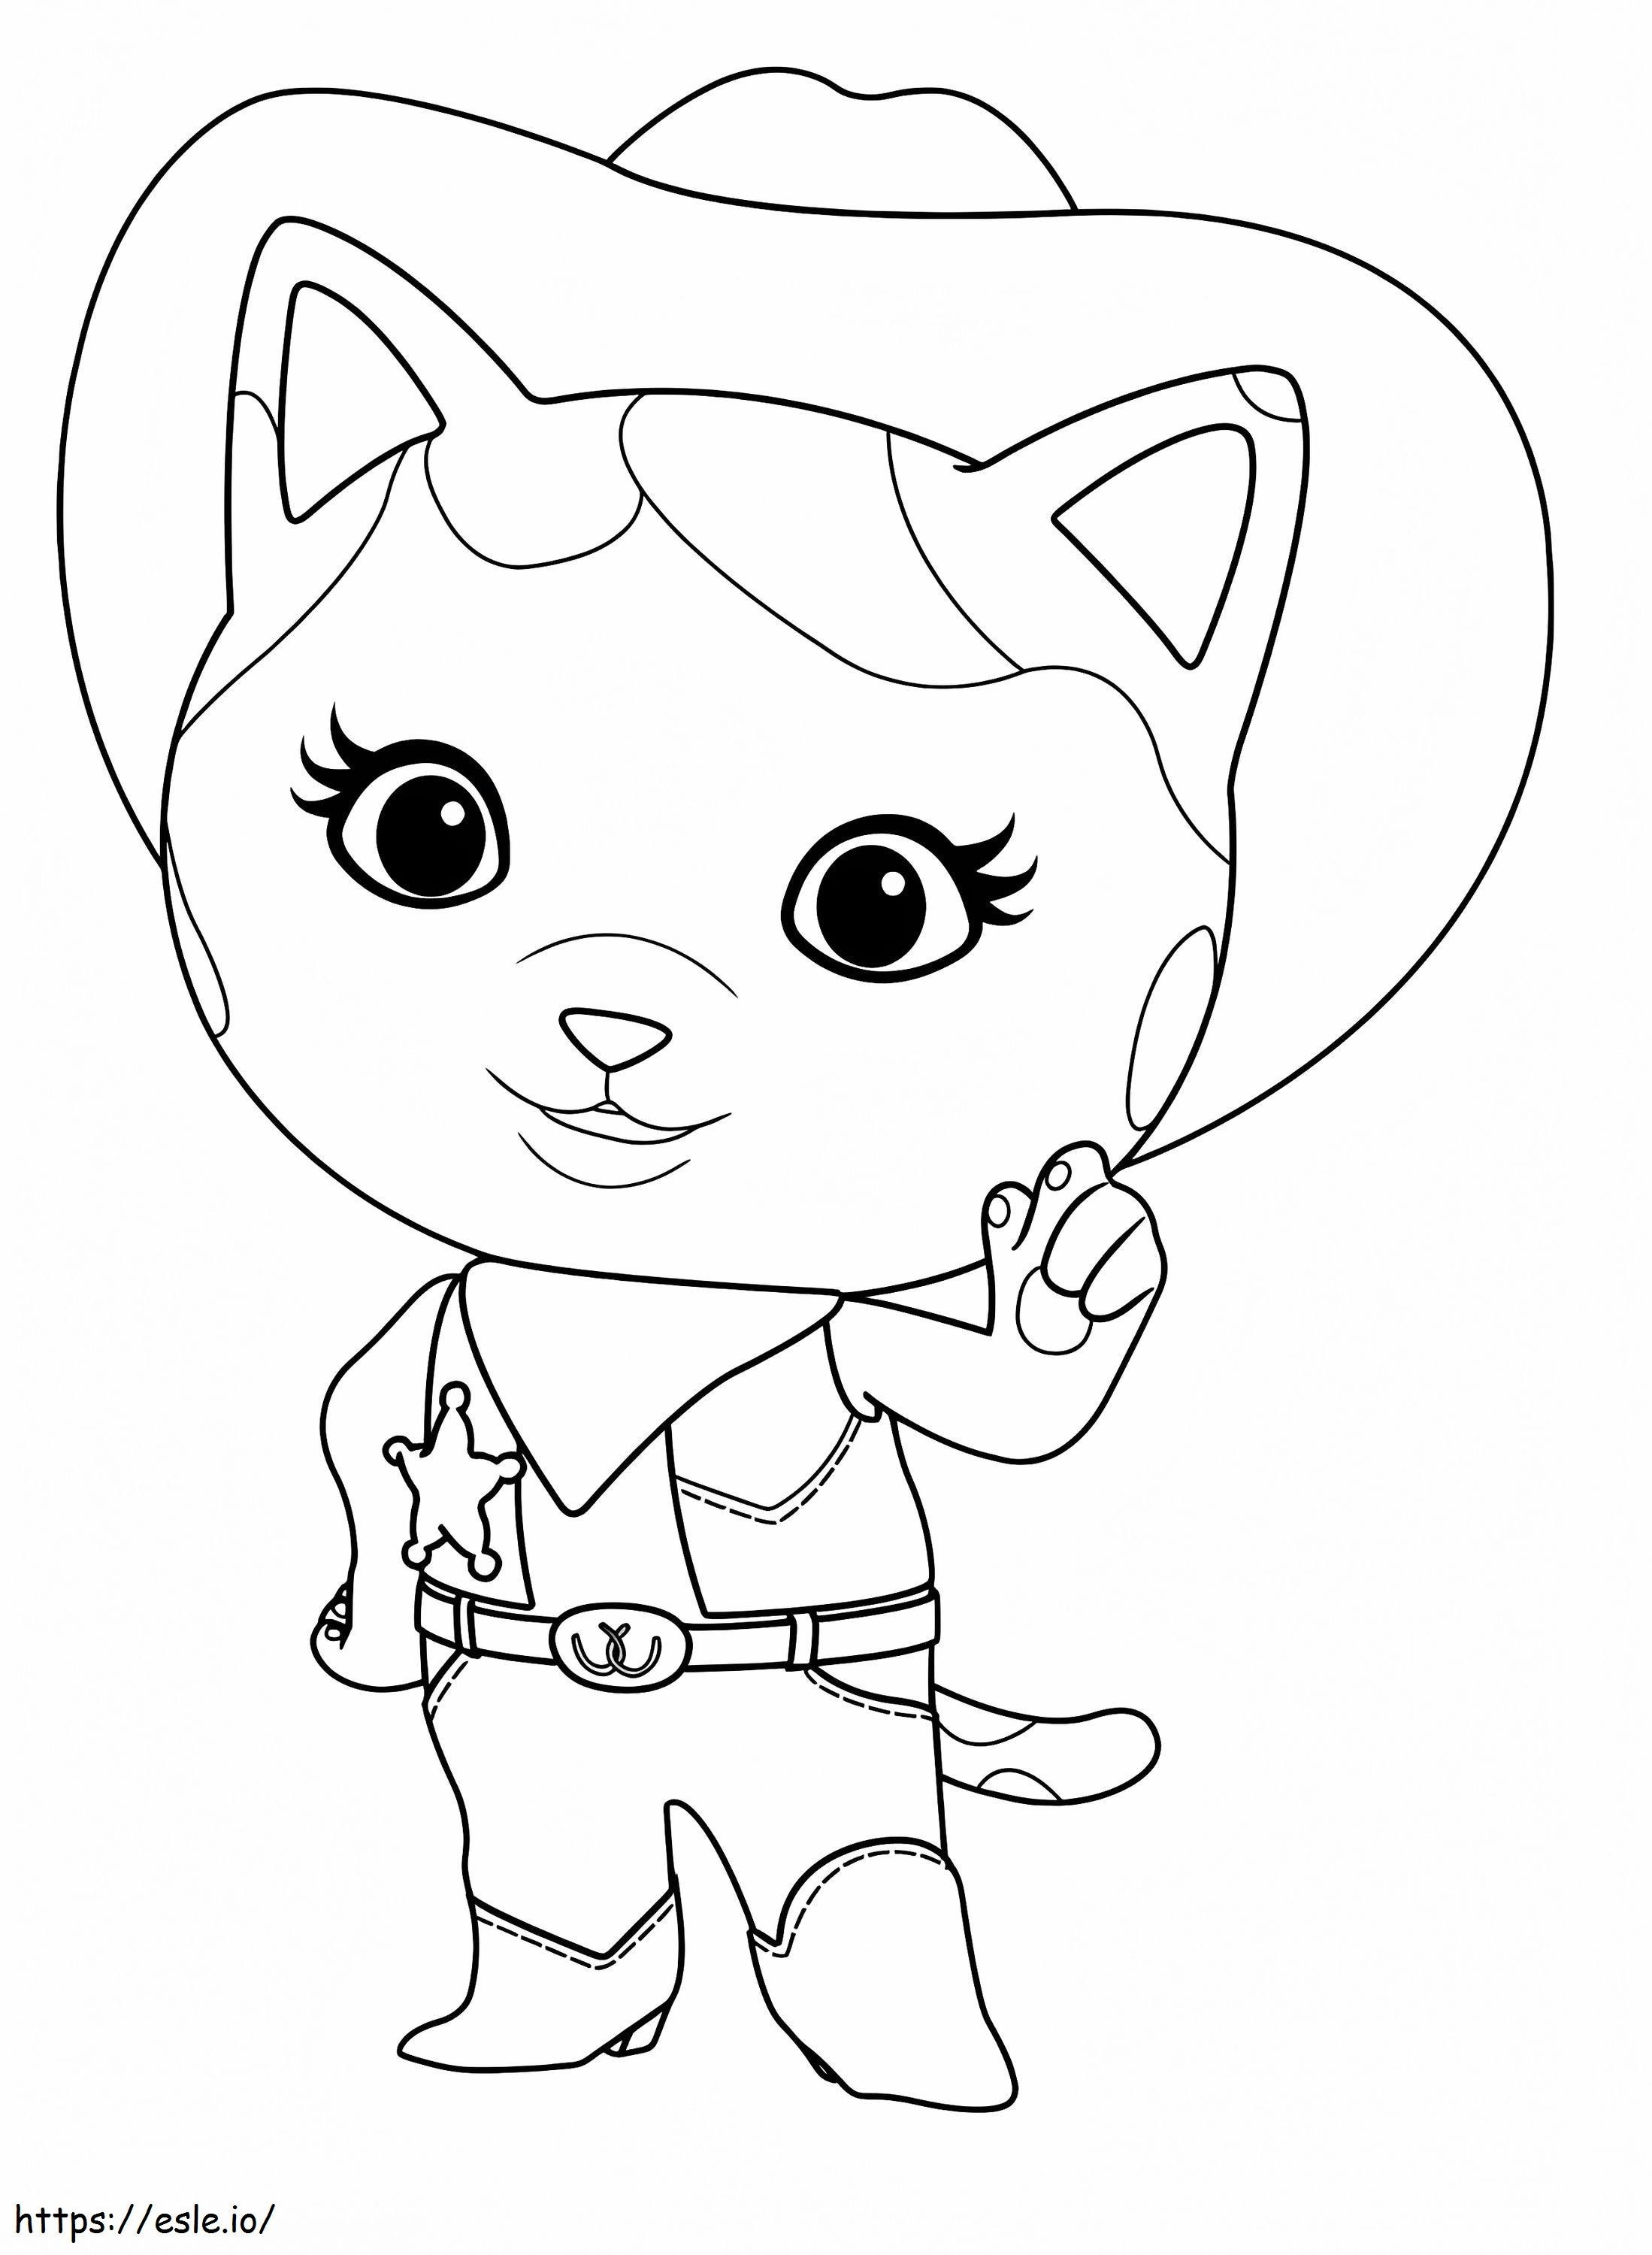 Cute Sheriff Callie coloring page